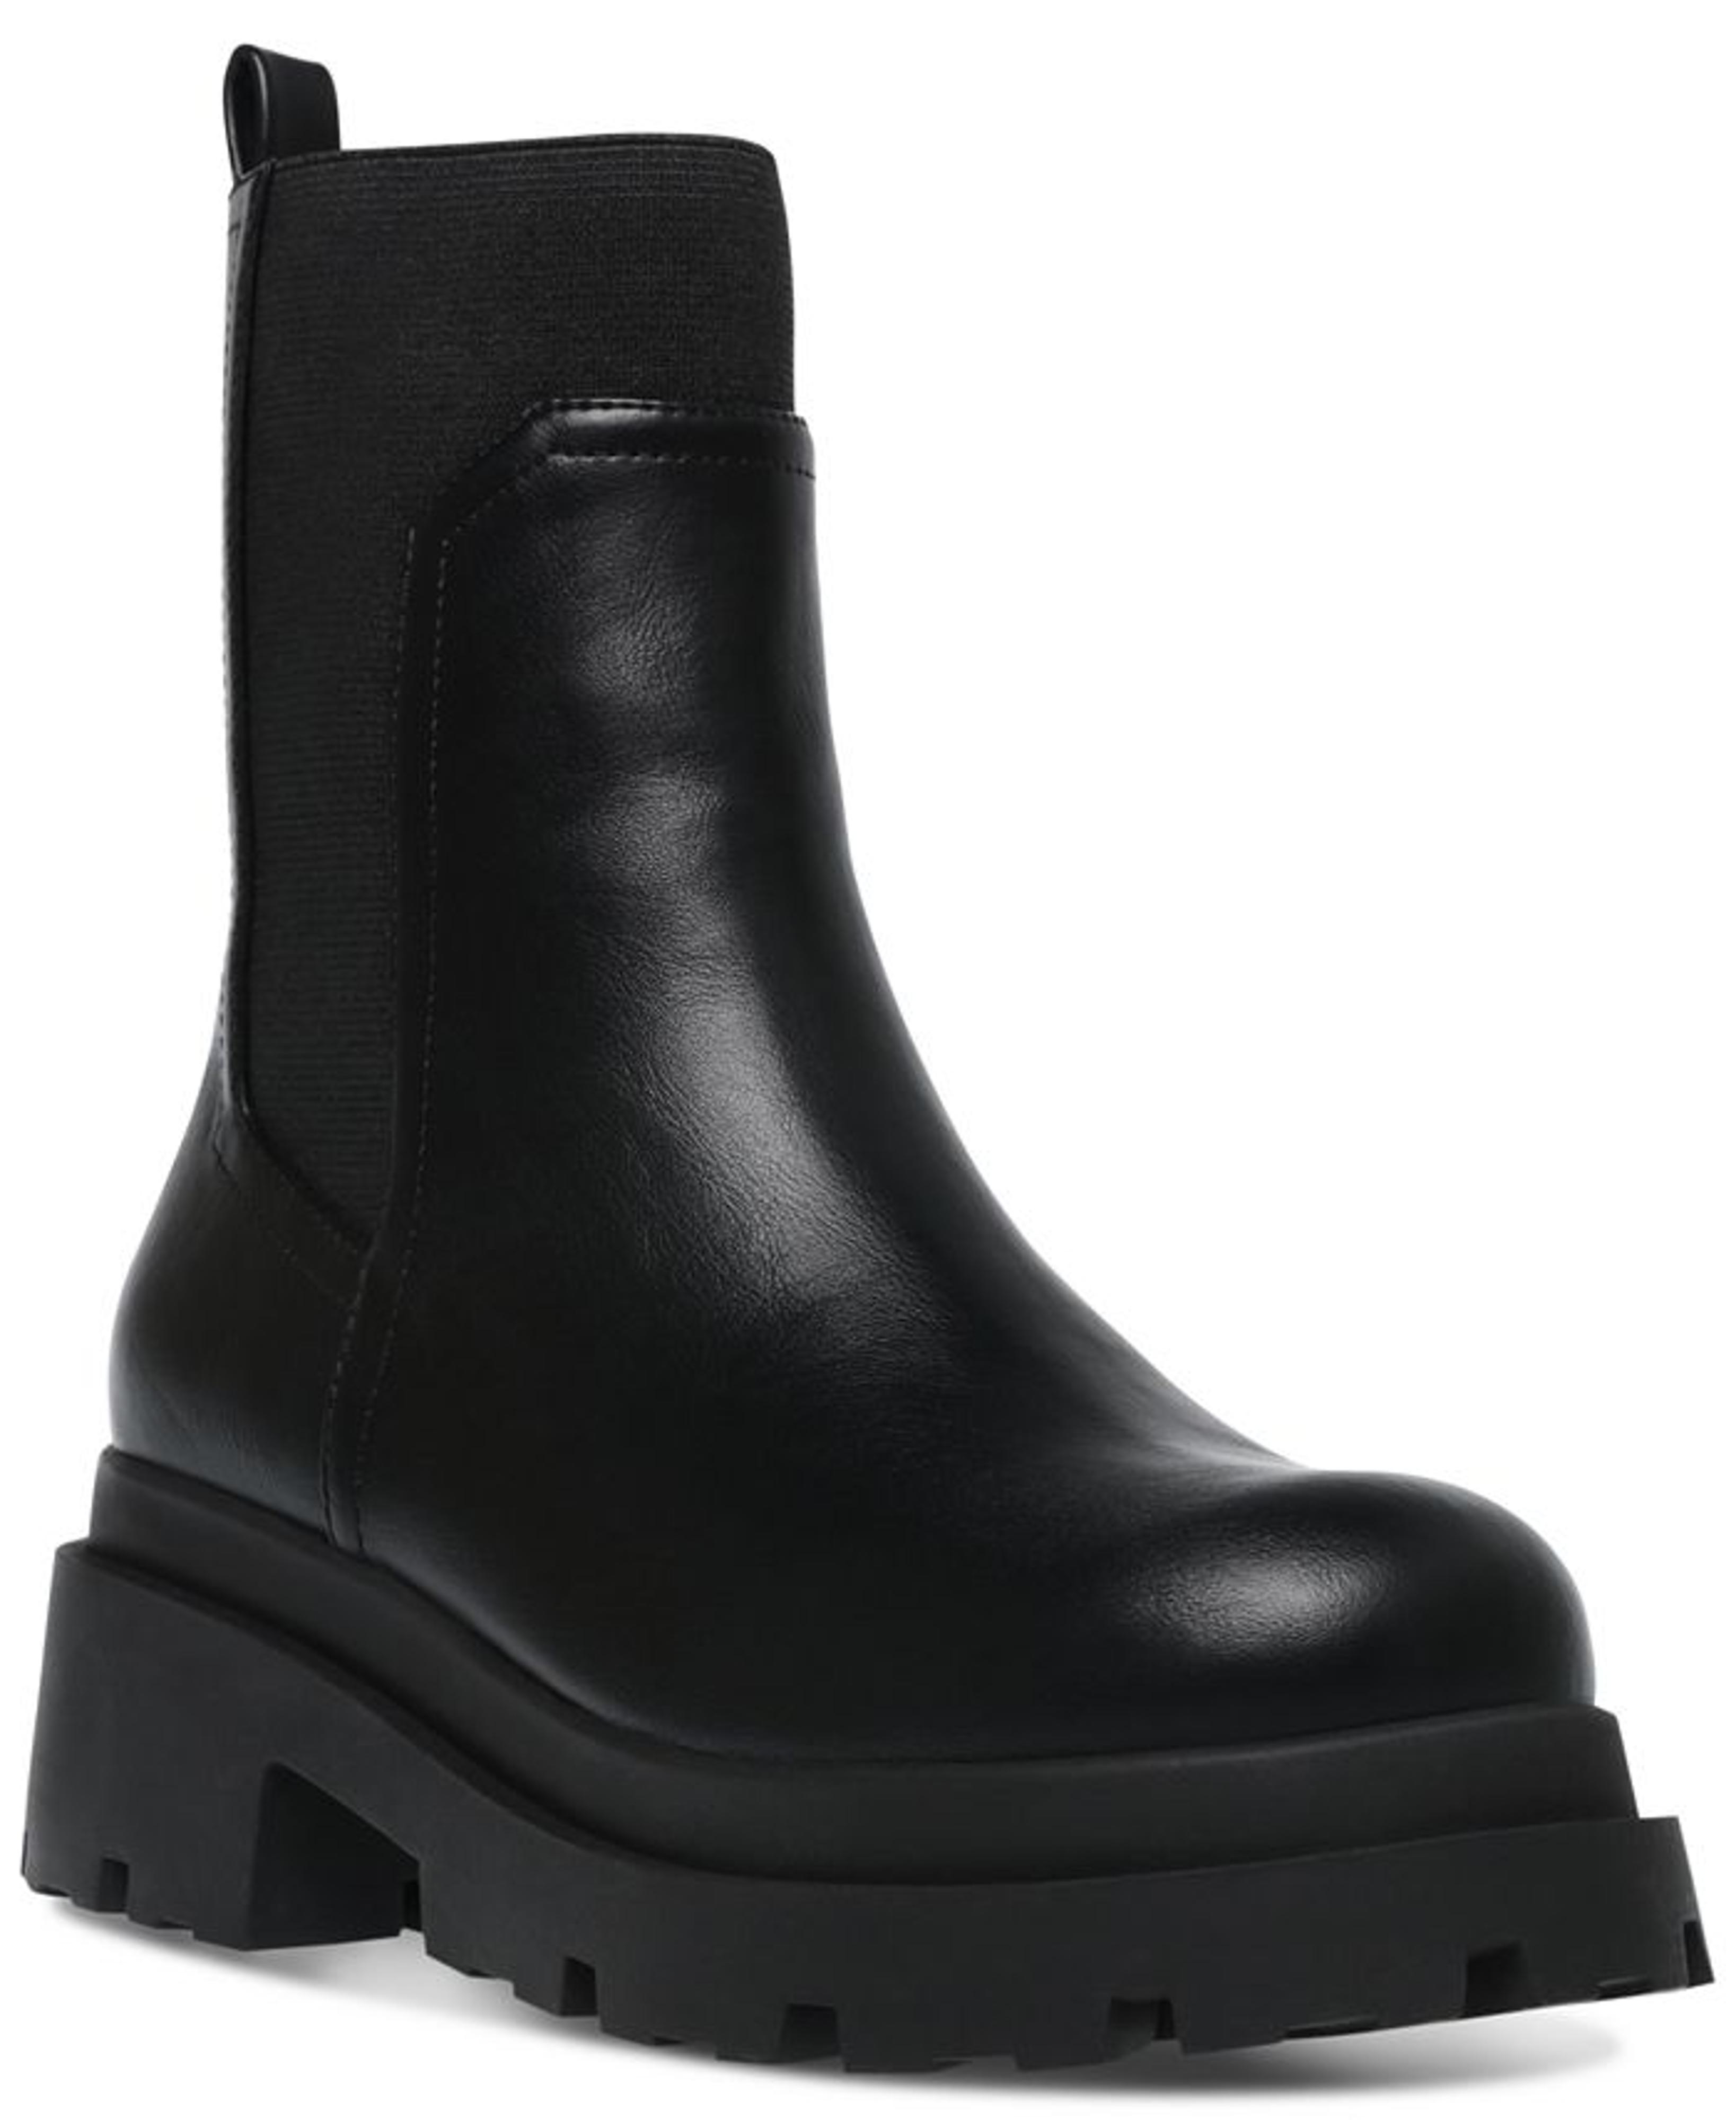  Brody Chelsea Boots